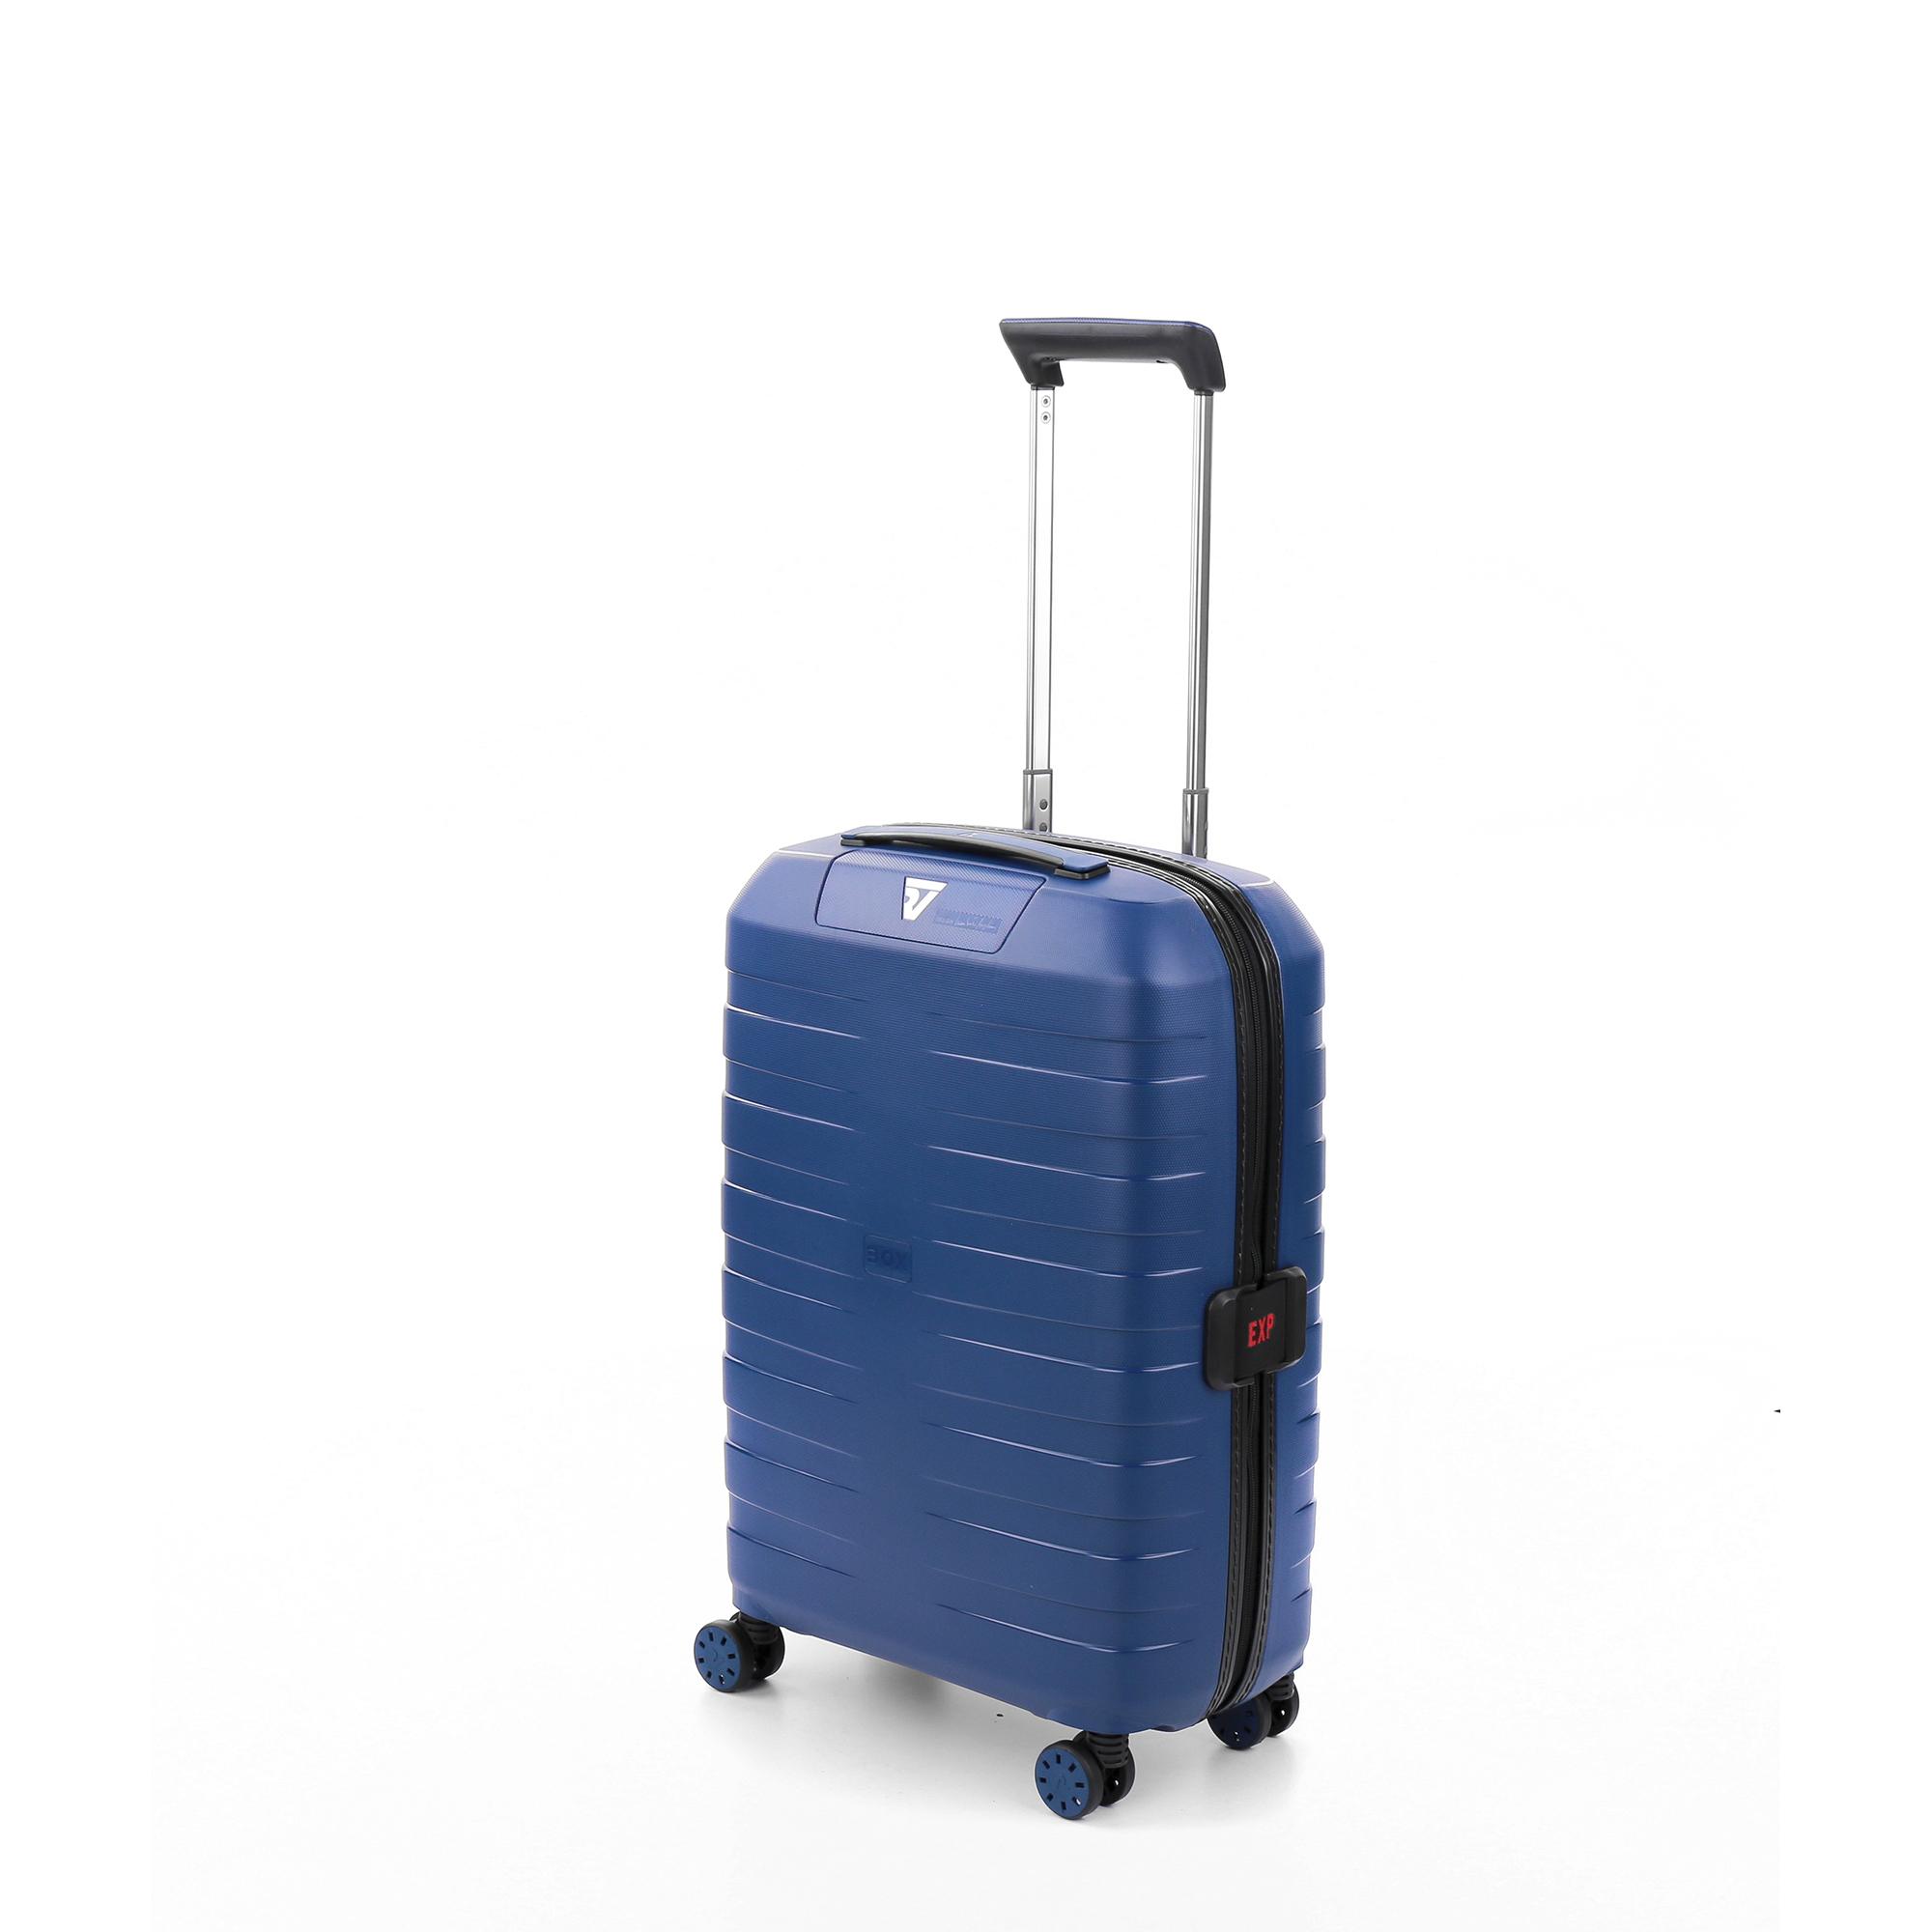 ARIANA Lightweight Luggage Trolley Suitcase Travel Cabin Bag Hand Luggage Cabin Size RT42 Navy-Blue, 18 XSmall 